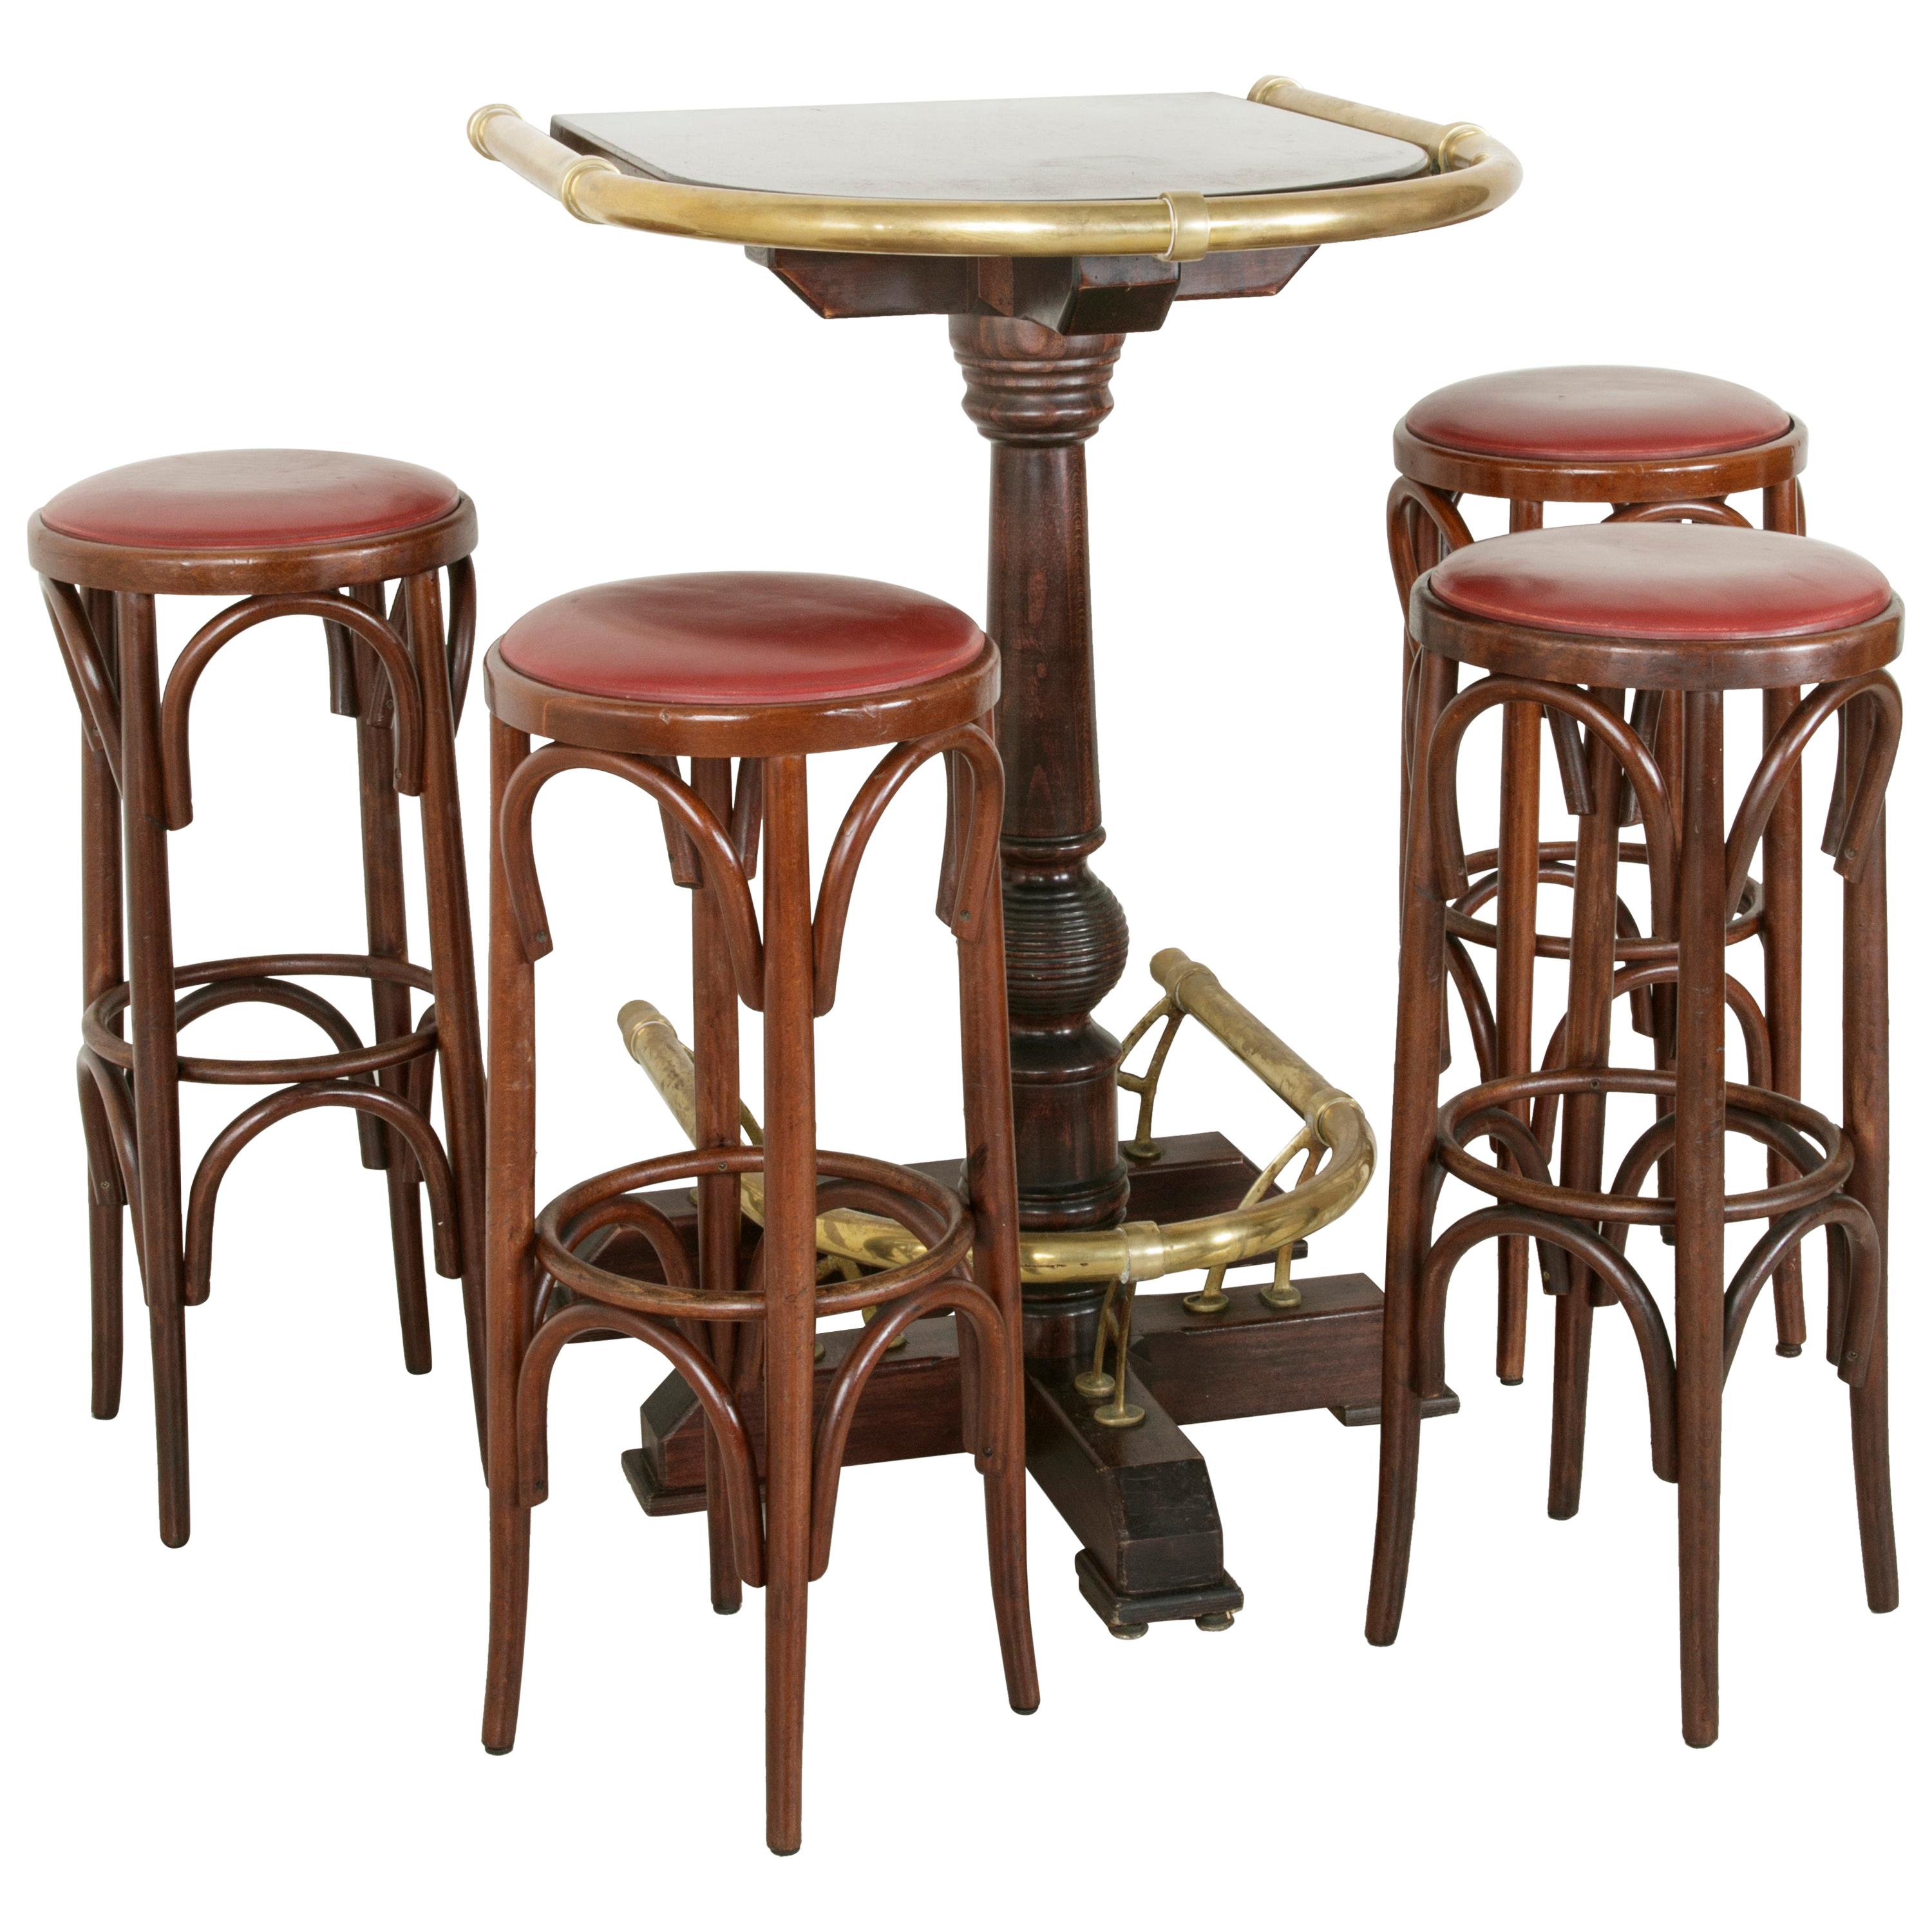 20th Century Paris Brasserie High Top Table with Brass Rails and Four Bar Stools